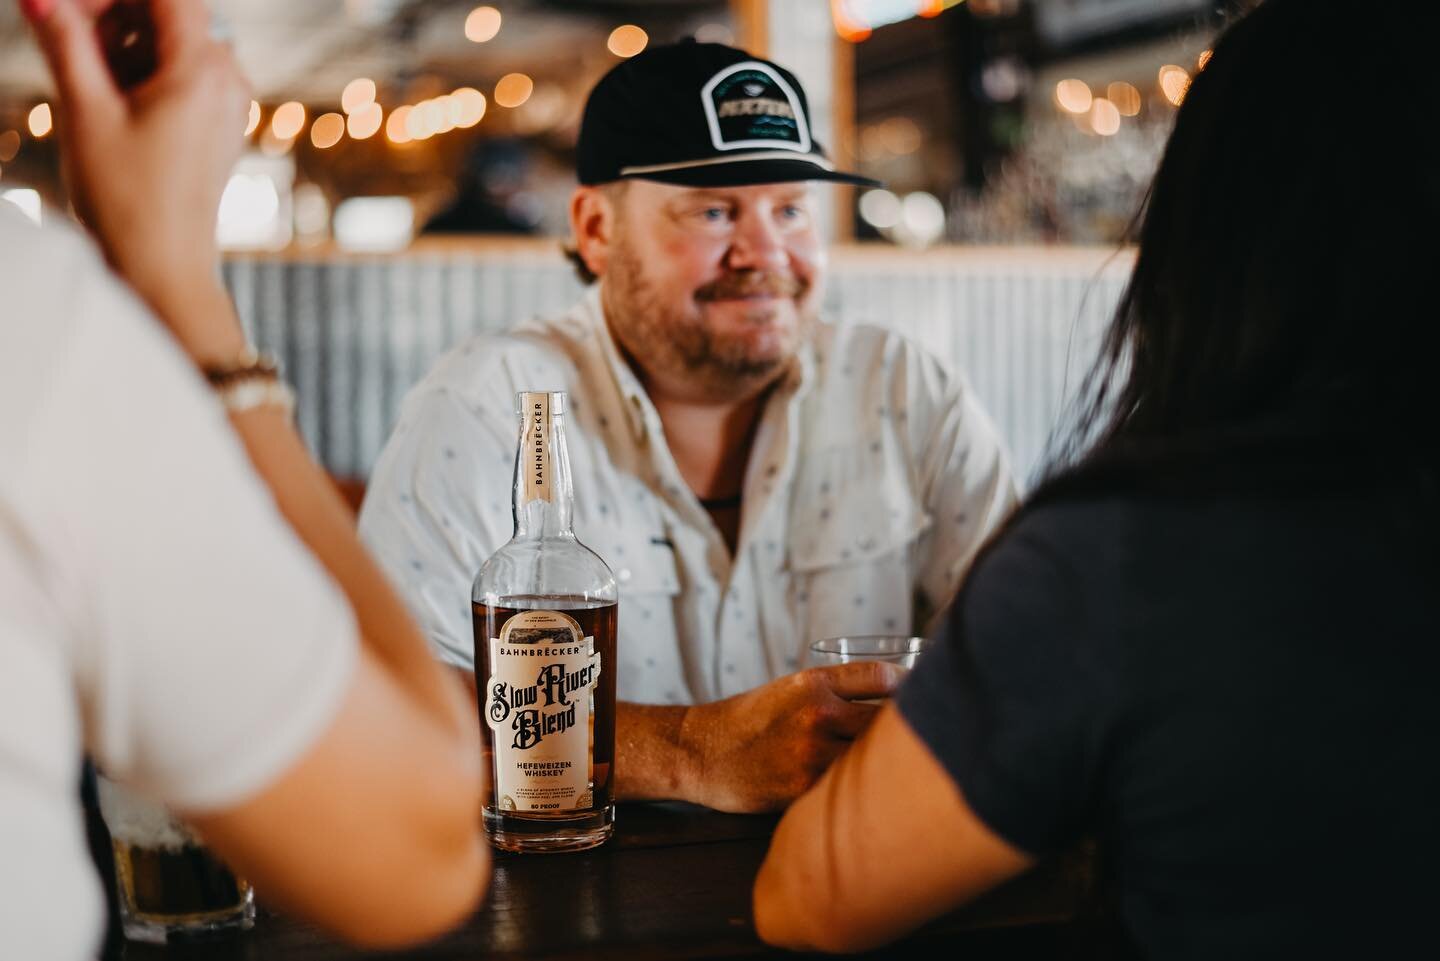 Happy Birthday to the whiskey man himself and one of our founders, Randy Rogers! 🥃Wish him well in the comments! 

#bahnbrecker #areyouabahnbrecker #whisky #randyrogers #randyrogersband #slowriverblend #nbtx #whiskeylover